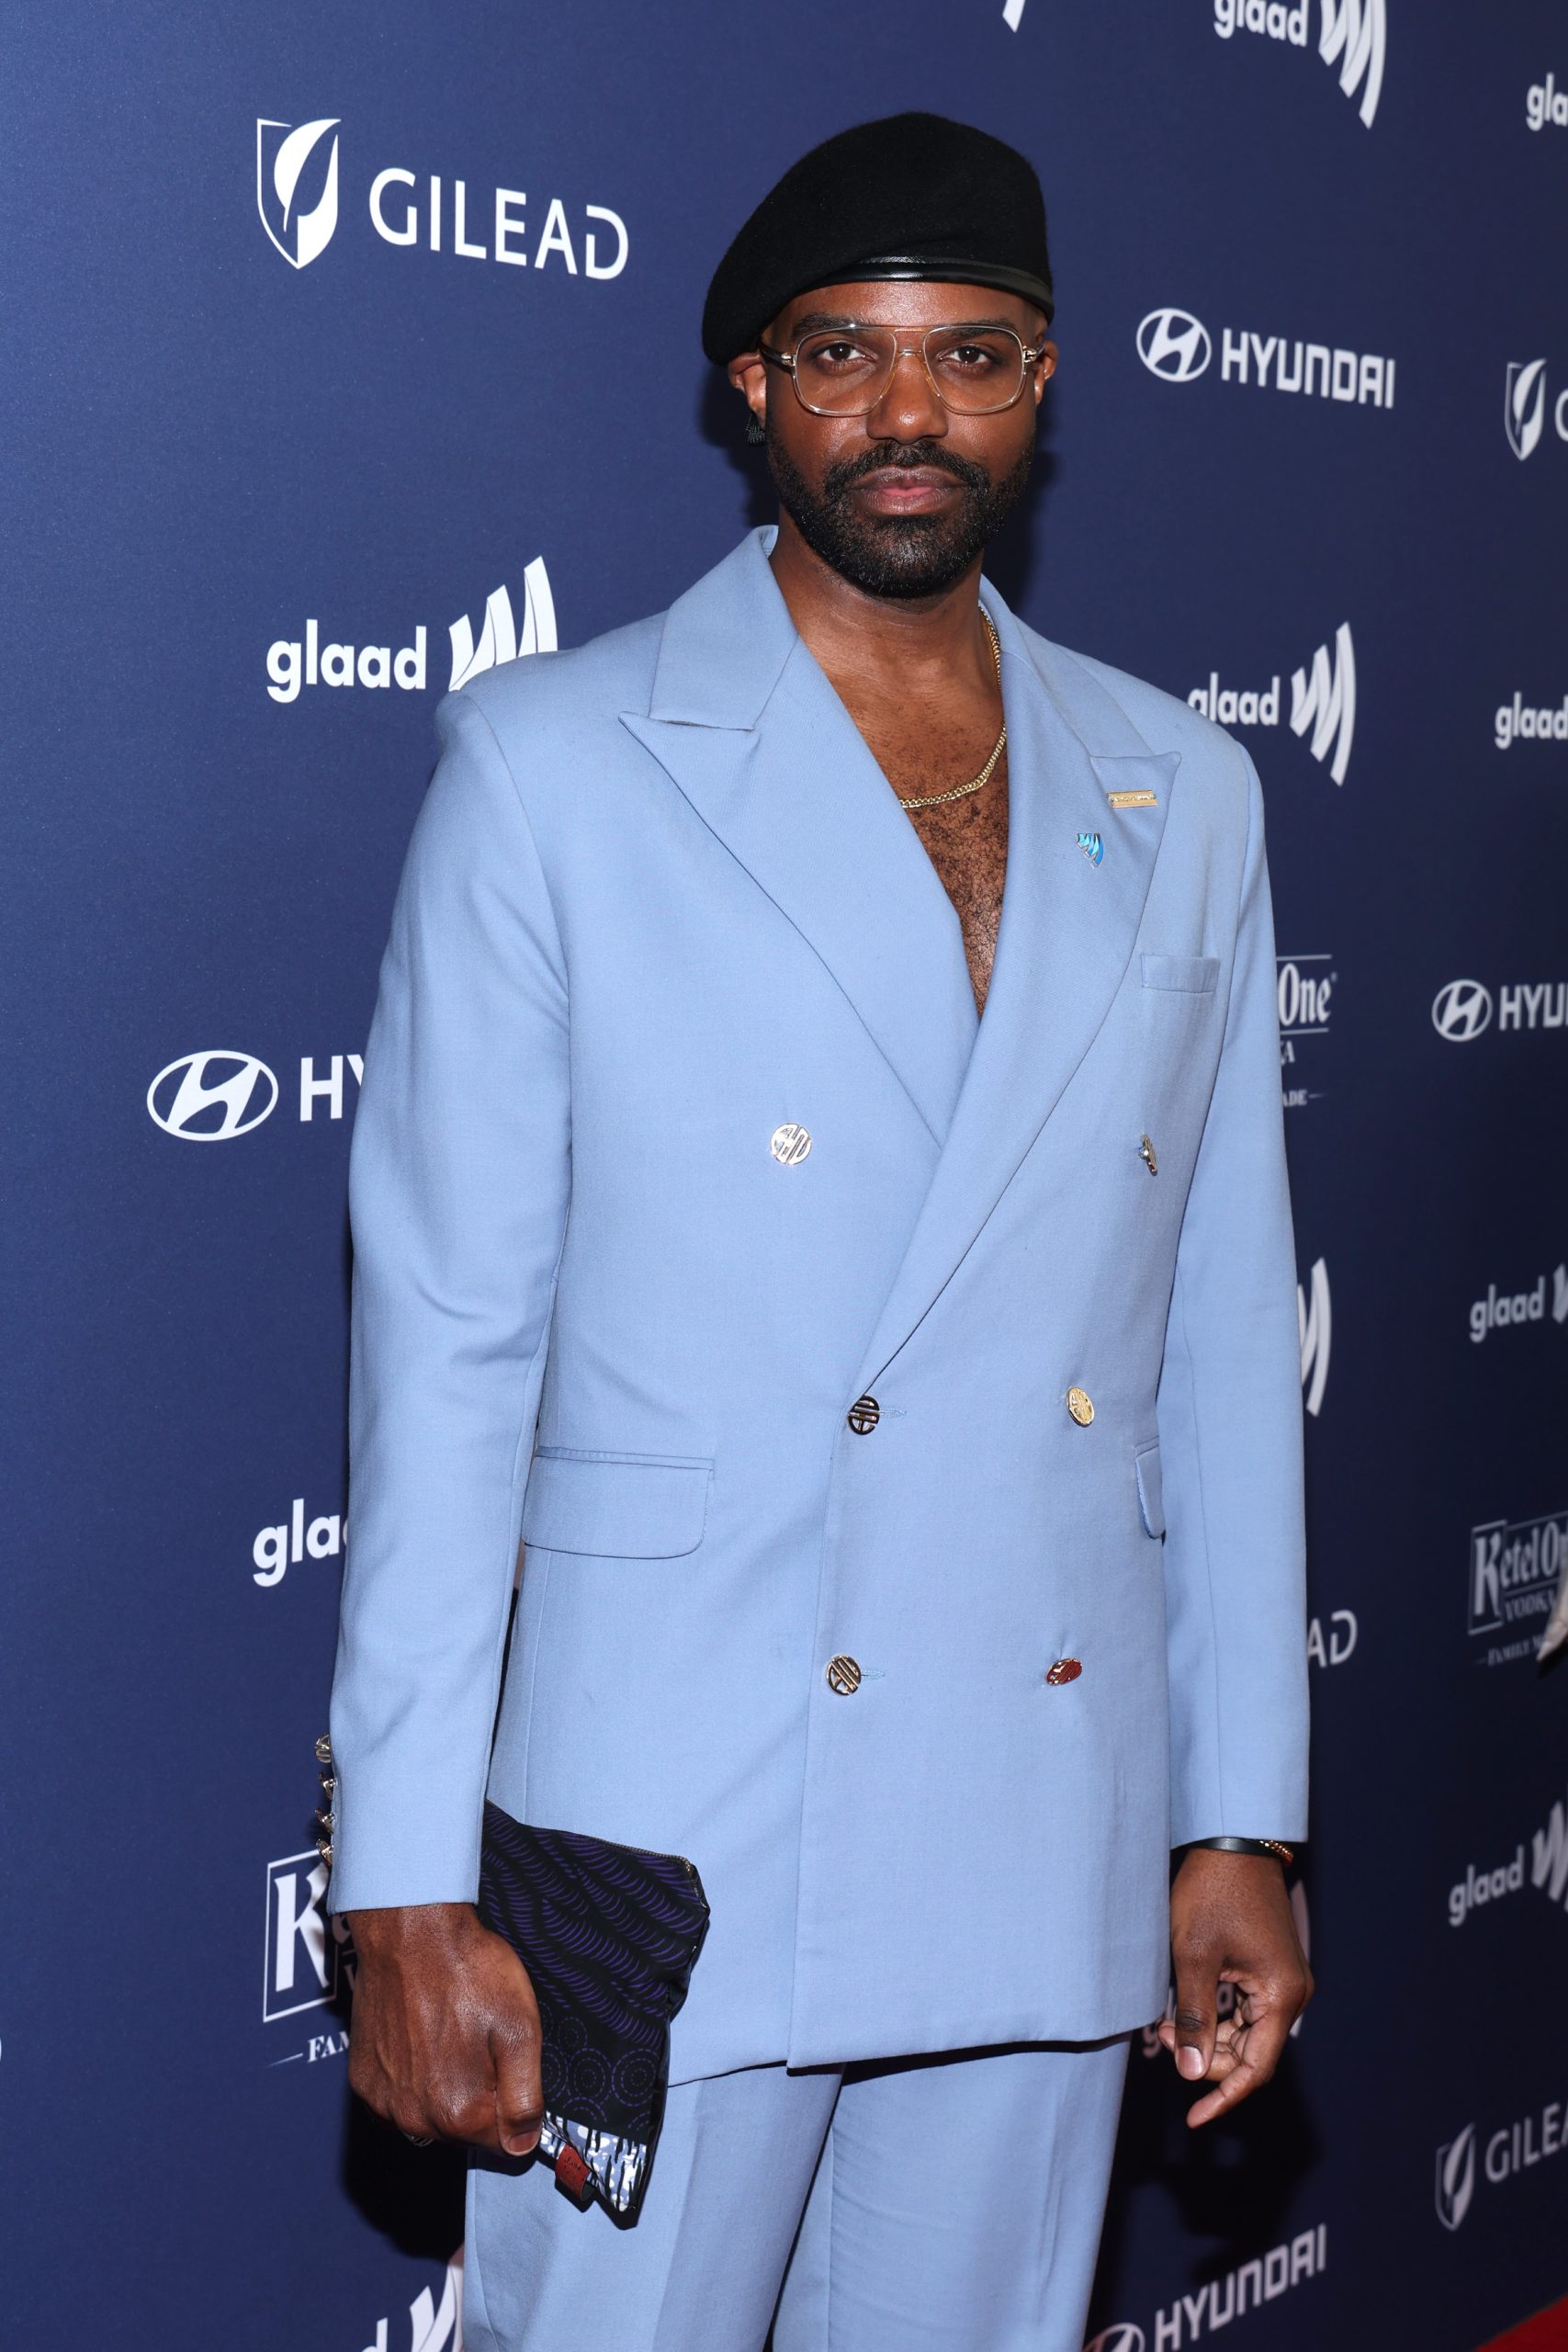 BEVERLY HILLS, CALIFORNIA - MARCH 30: Carl Clemons-Hopkins attends the 34th Annual GLAAD Media Awards Sponsored by Ketel One Family Made Vodka at The Beverly Hilton on March 30, 2023 in Beverly Hills, California. (Photo by Phillip Faraone/Getty Images for Ketel One)